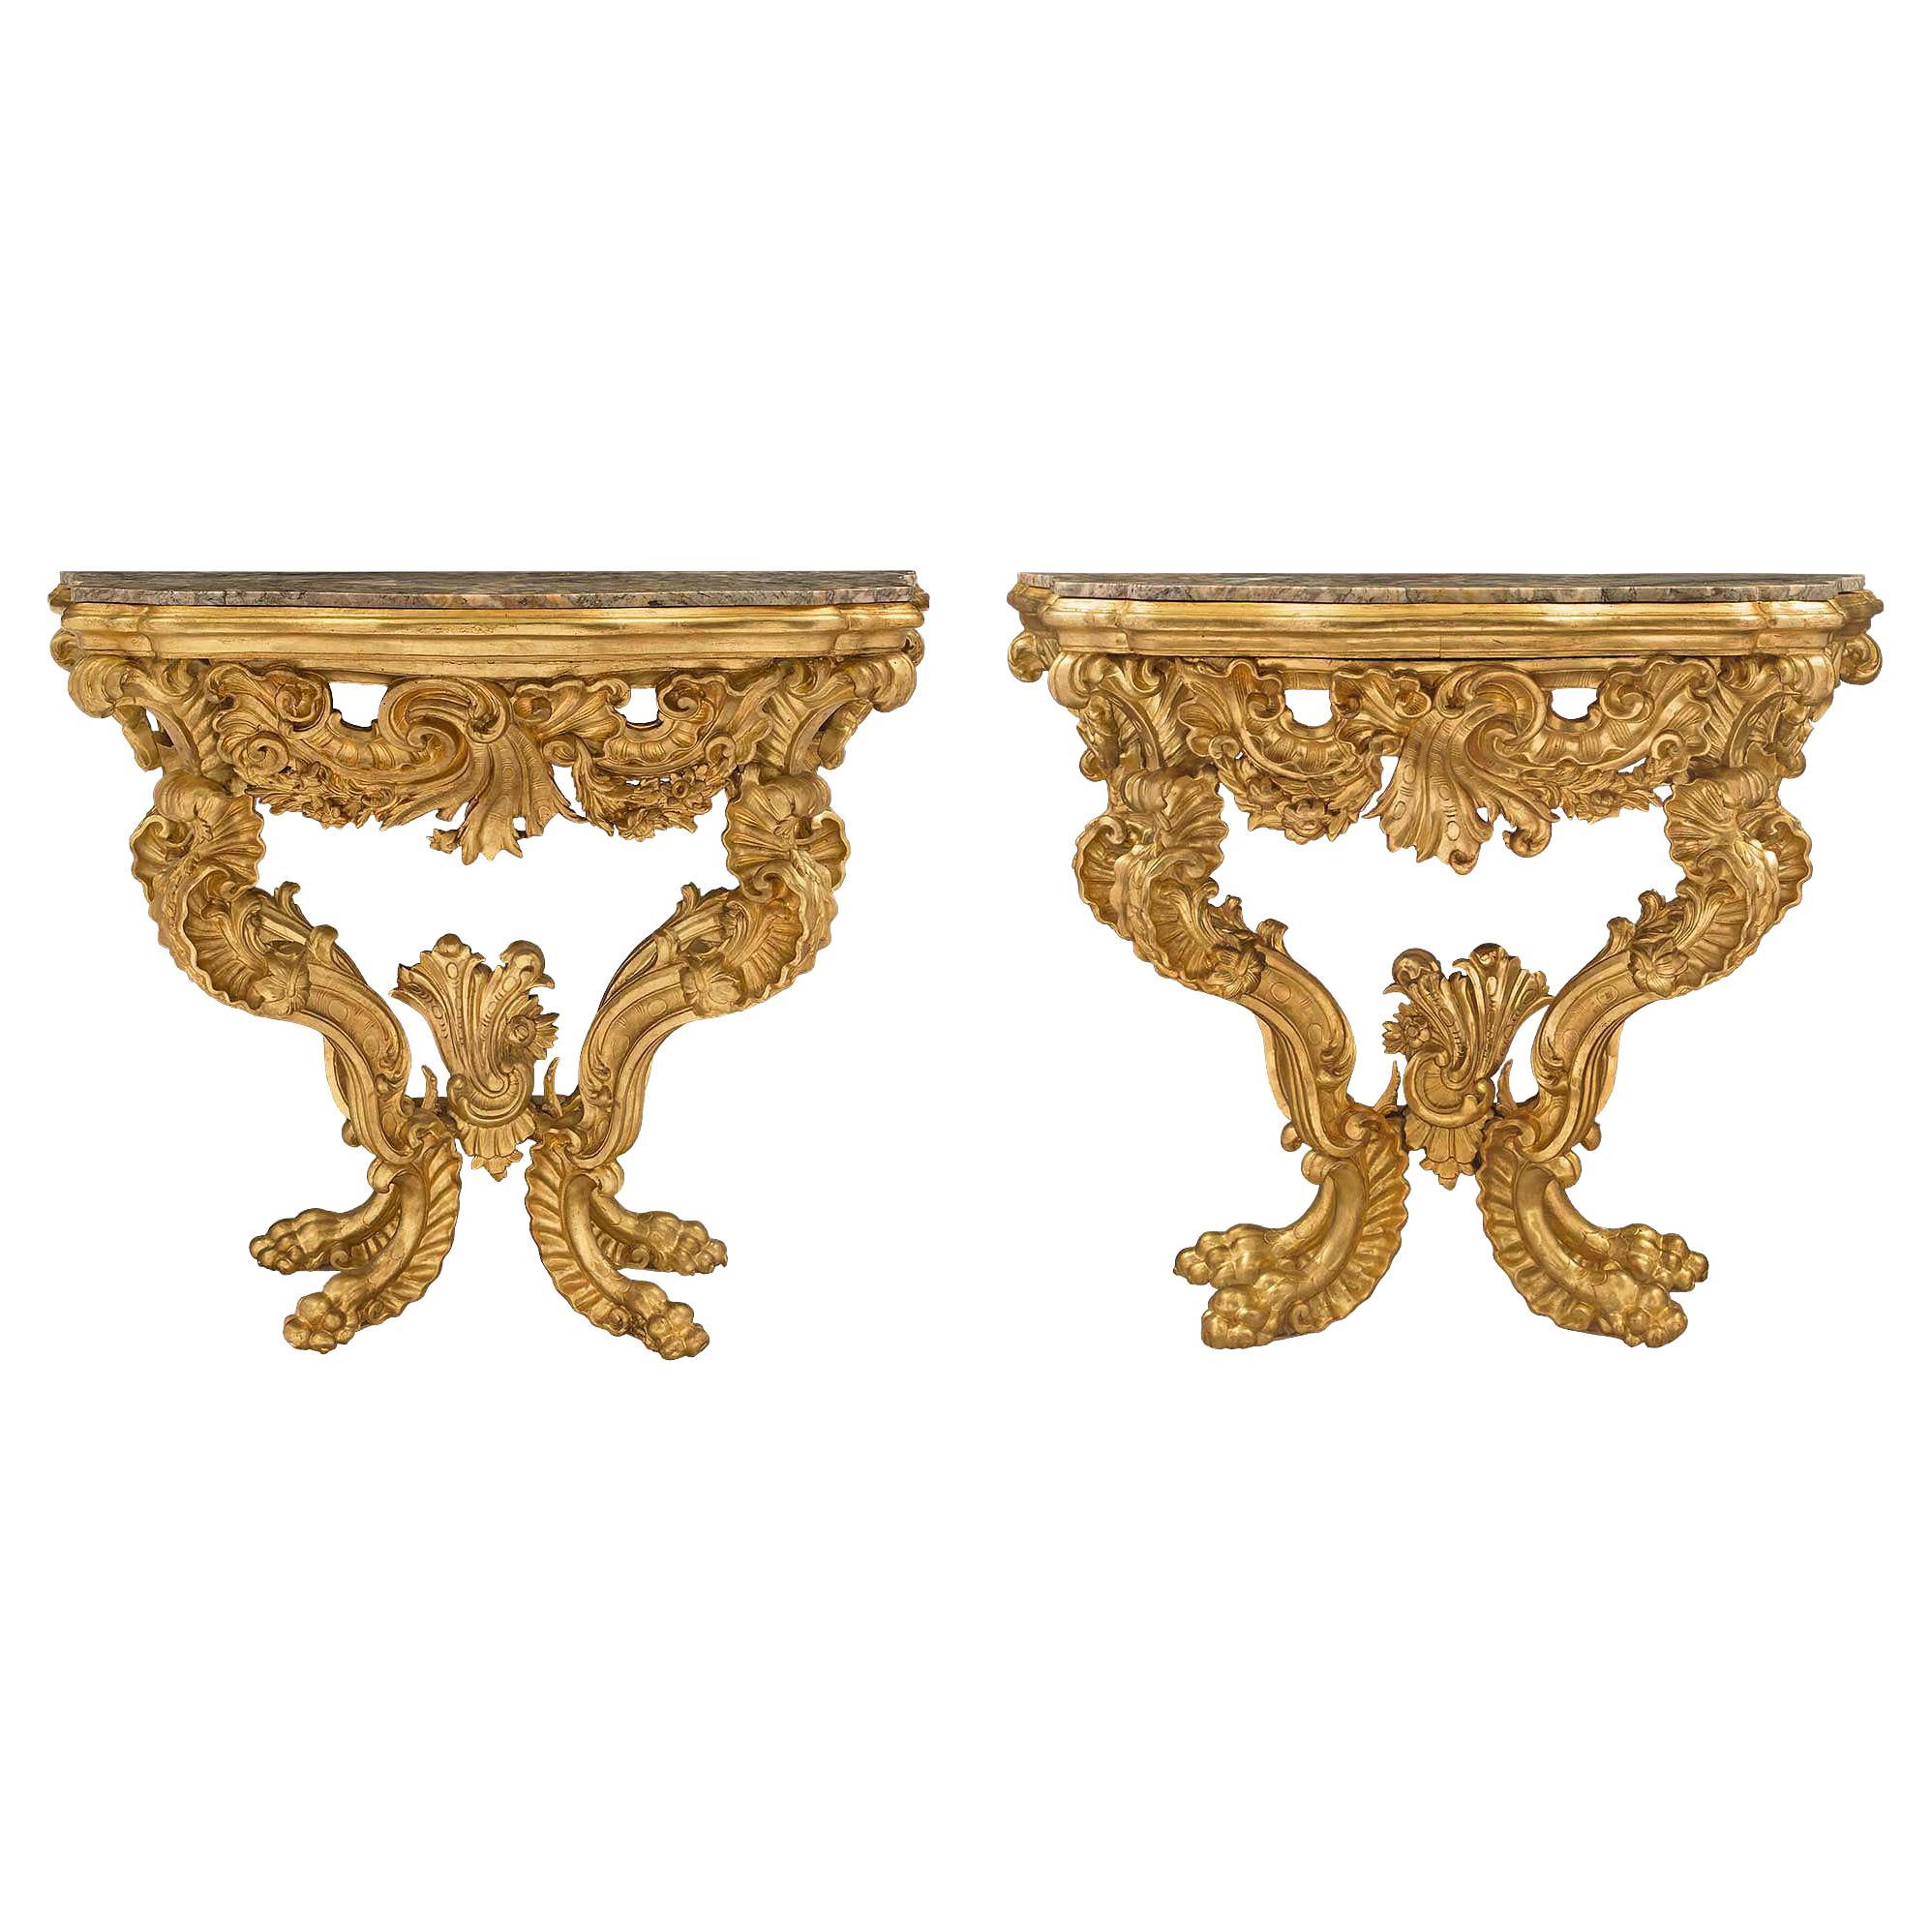 Pair of Italian 18th Century Baroque Giltwood and Marble Four Legged Consoles For Sale